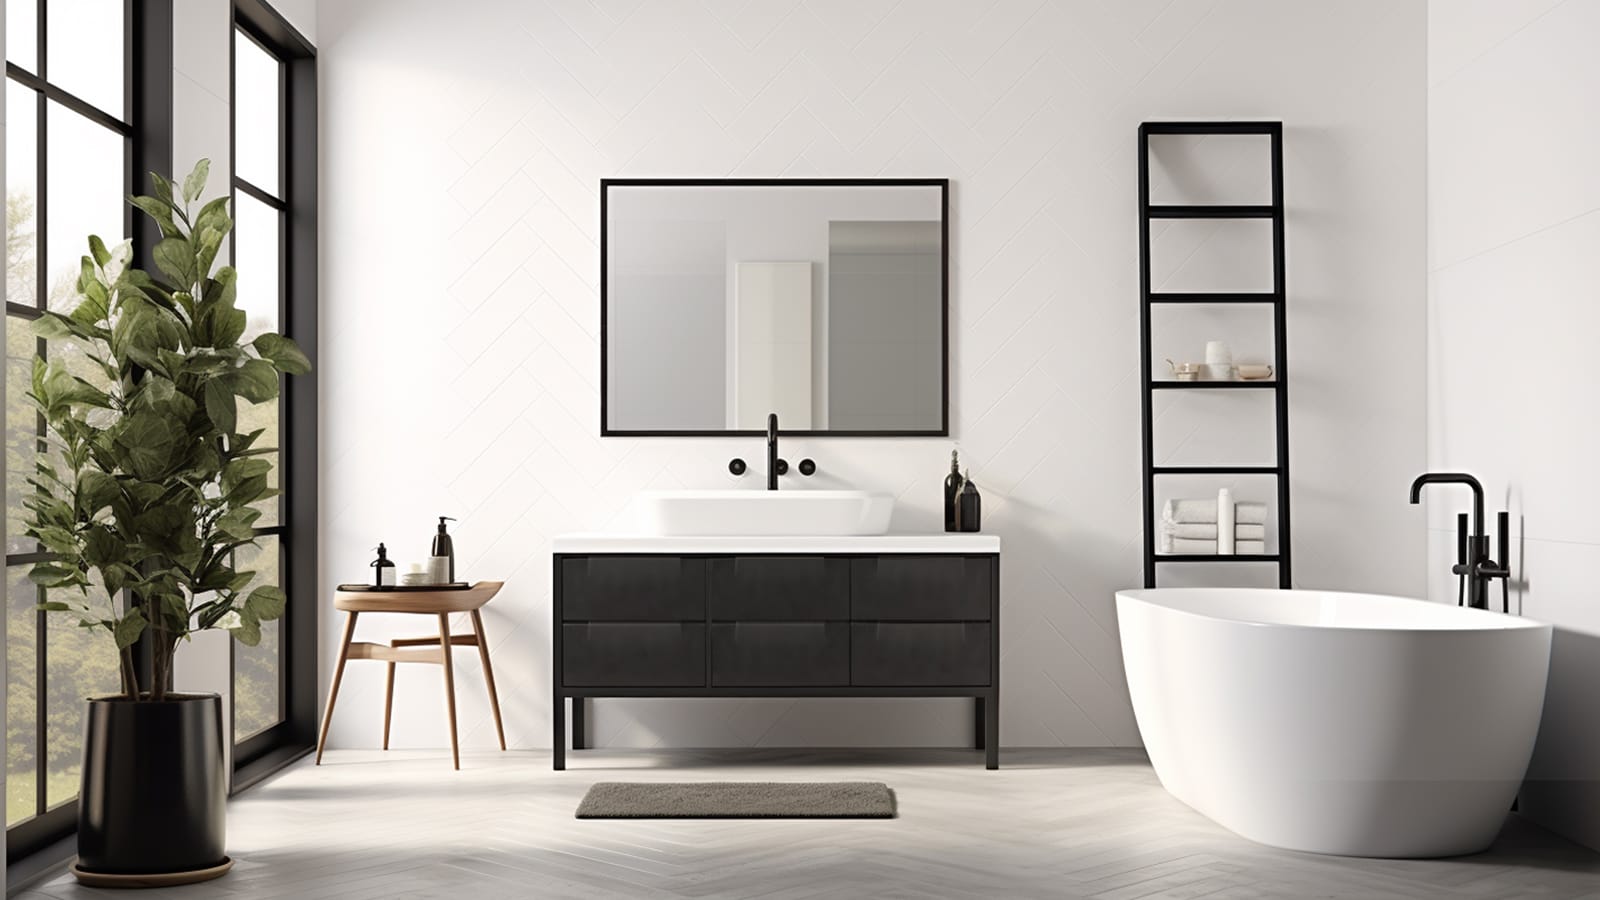 A black and white bathroom with a tub, sink and mirror.